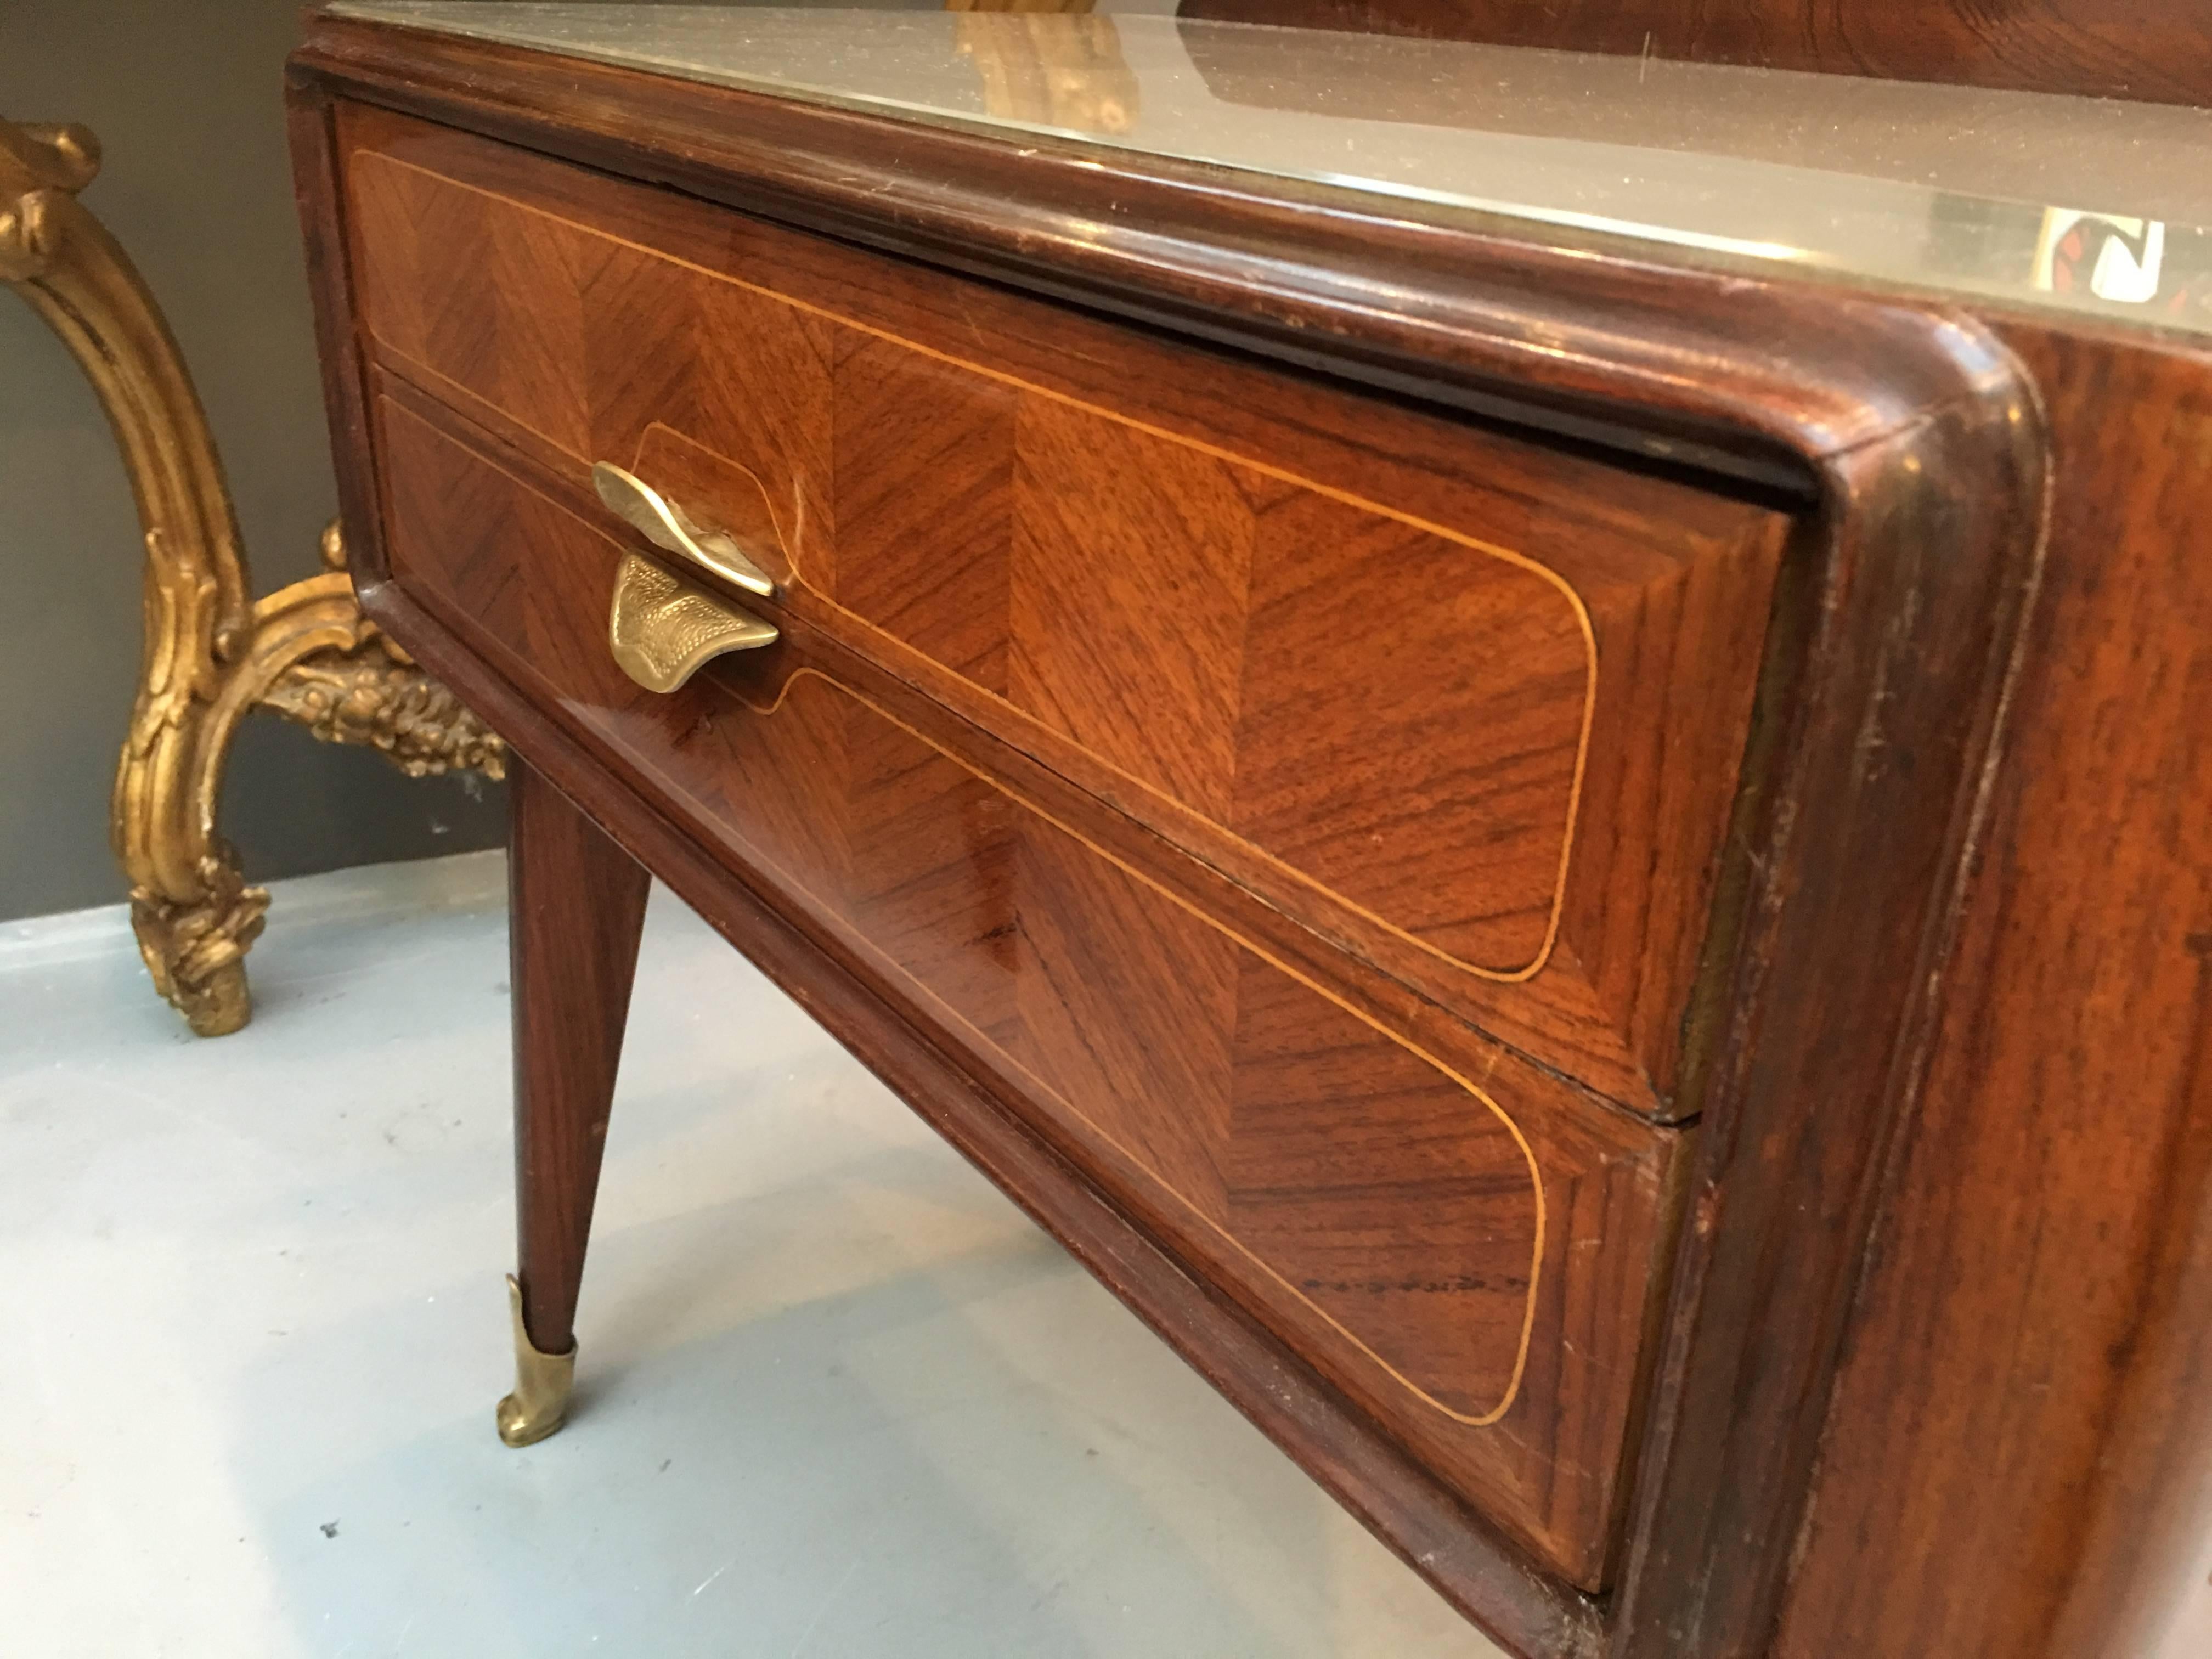 A really lovely pair of 1950s Italian 'Dassi' rosewood and satinwood parquetry decorated side tables with two drawers each.

Original gilt metal handles and feet as well as original glass tops.

Some usual signs of wear in places, but all part